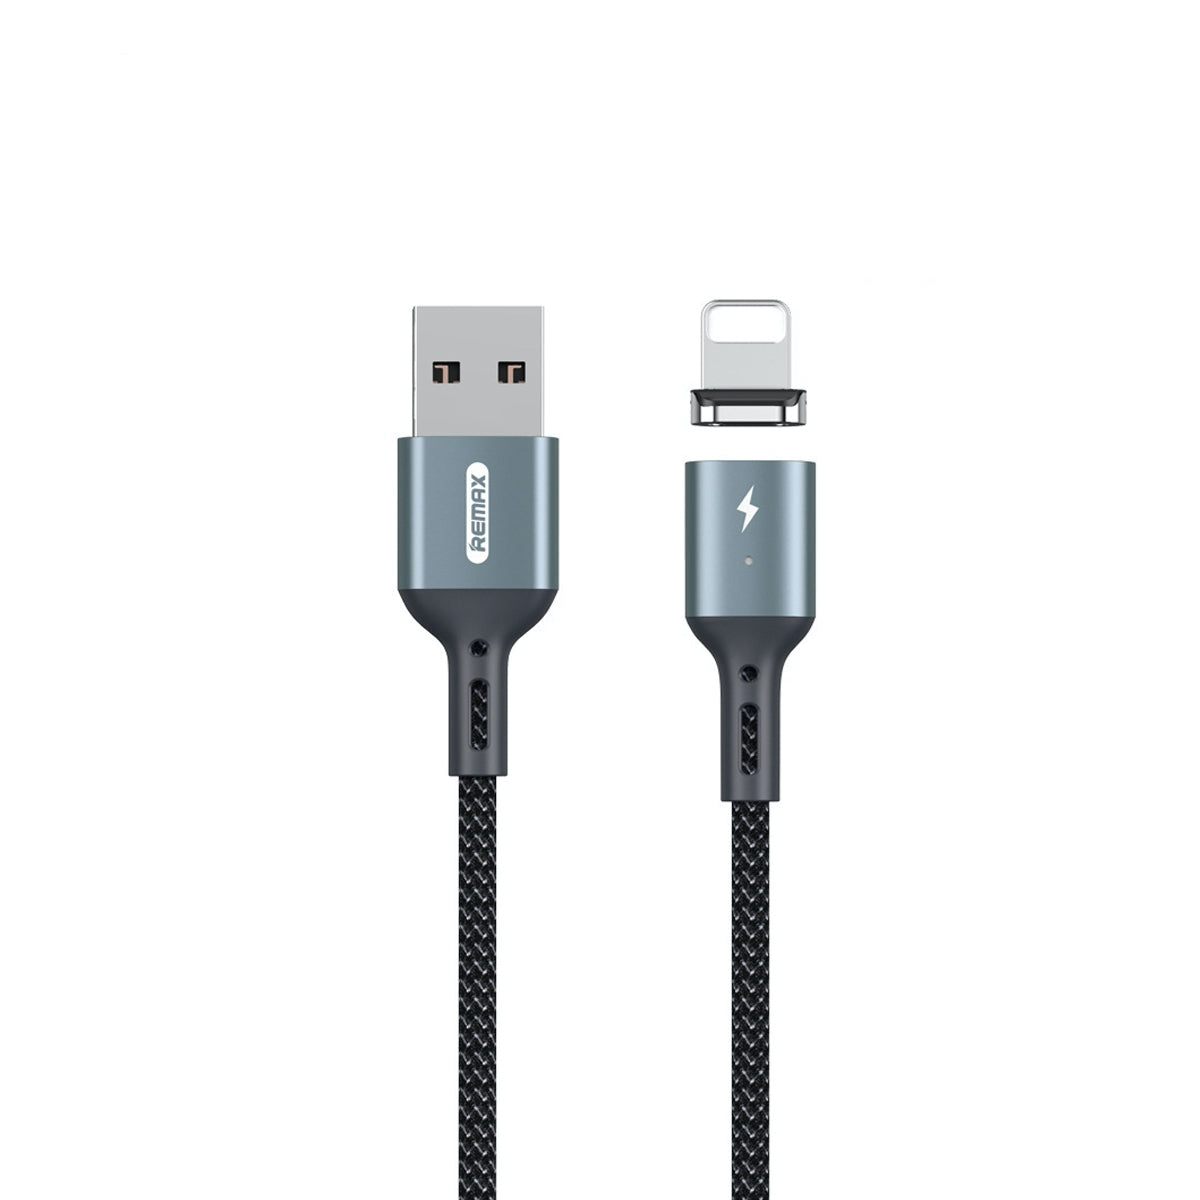 Remax Cigan Series 3.0A Powerful Magnet Connection Data Cable RC-156i Lightning - Black